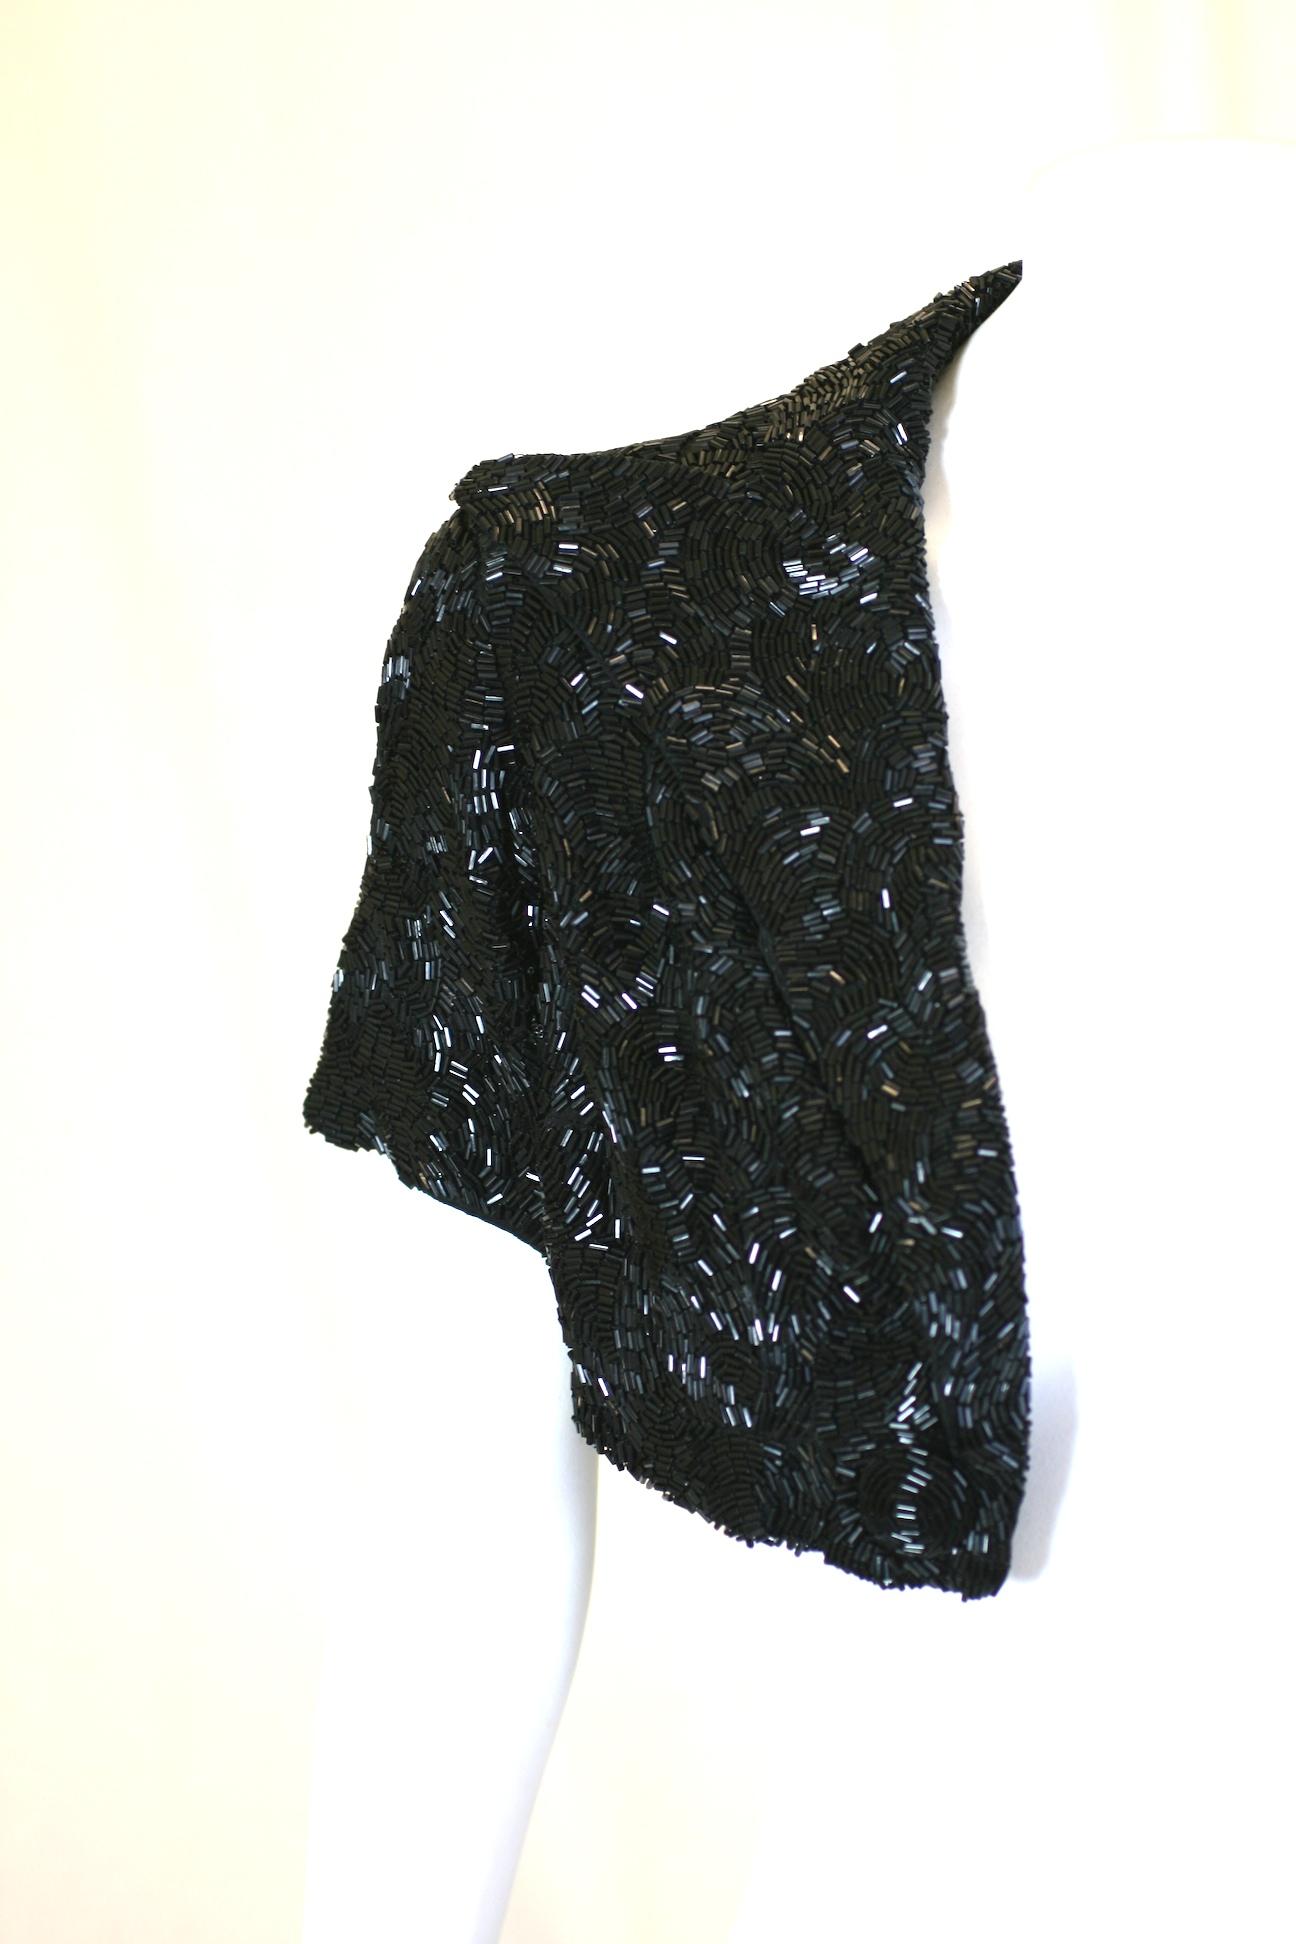 Art Deco Haute Couture Lesage bead embroidered short bolero short sleeved jacket. Of black jet vari size vermicelli tube beads patterned in overlapping scalloped swirls on silk crepe. The open jacket is tuxedo styled with large beaded lapels and two